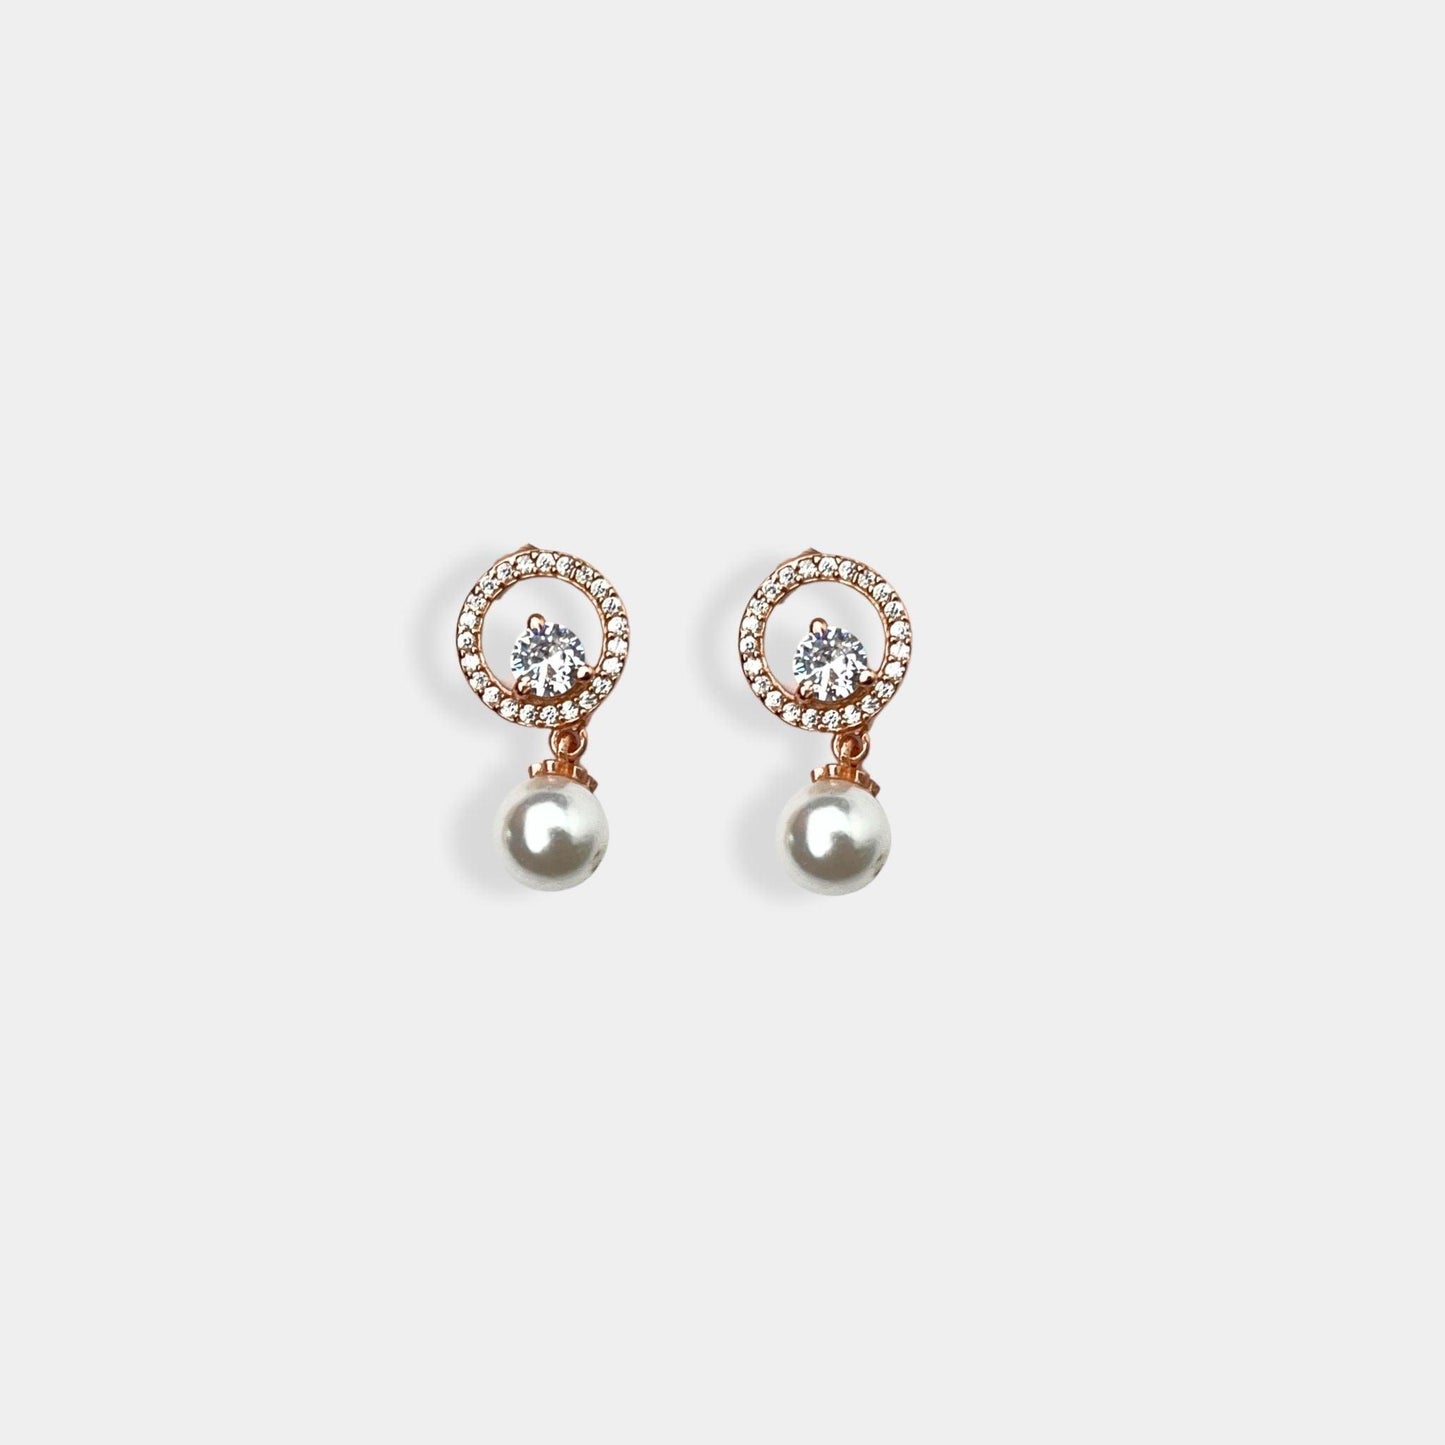  A pair of dainty silver earrings featuring lustrous pearls.